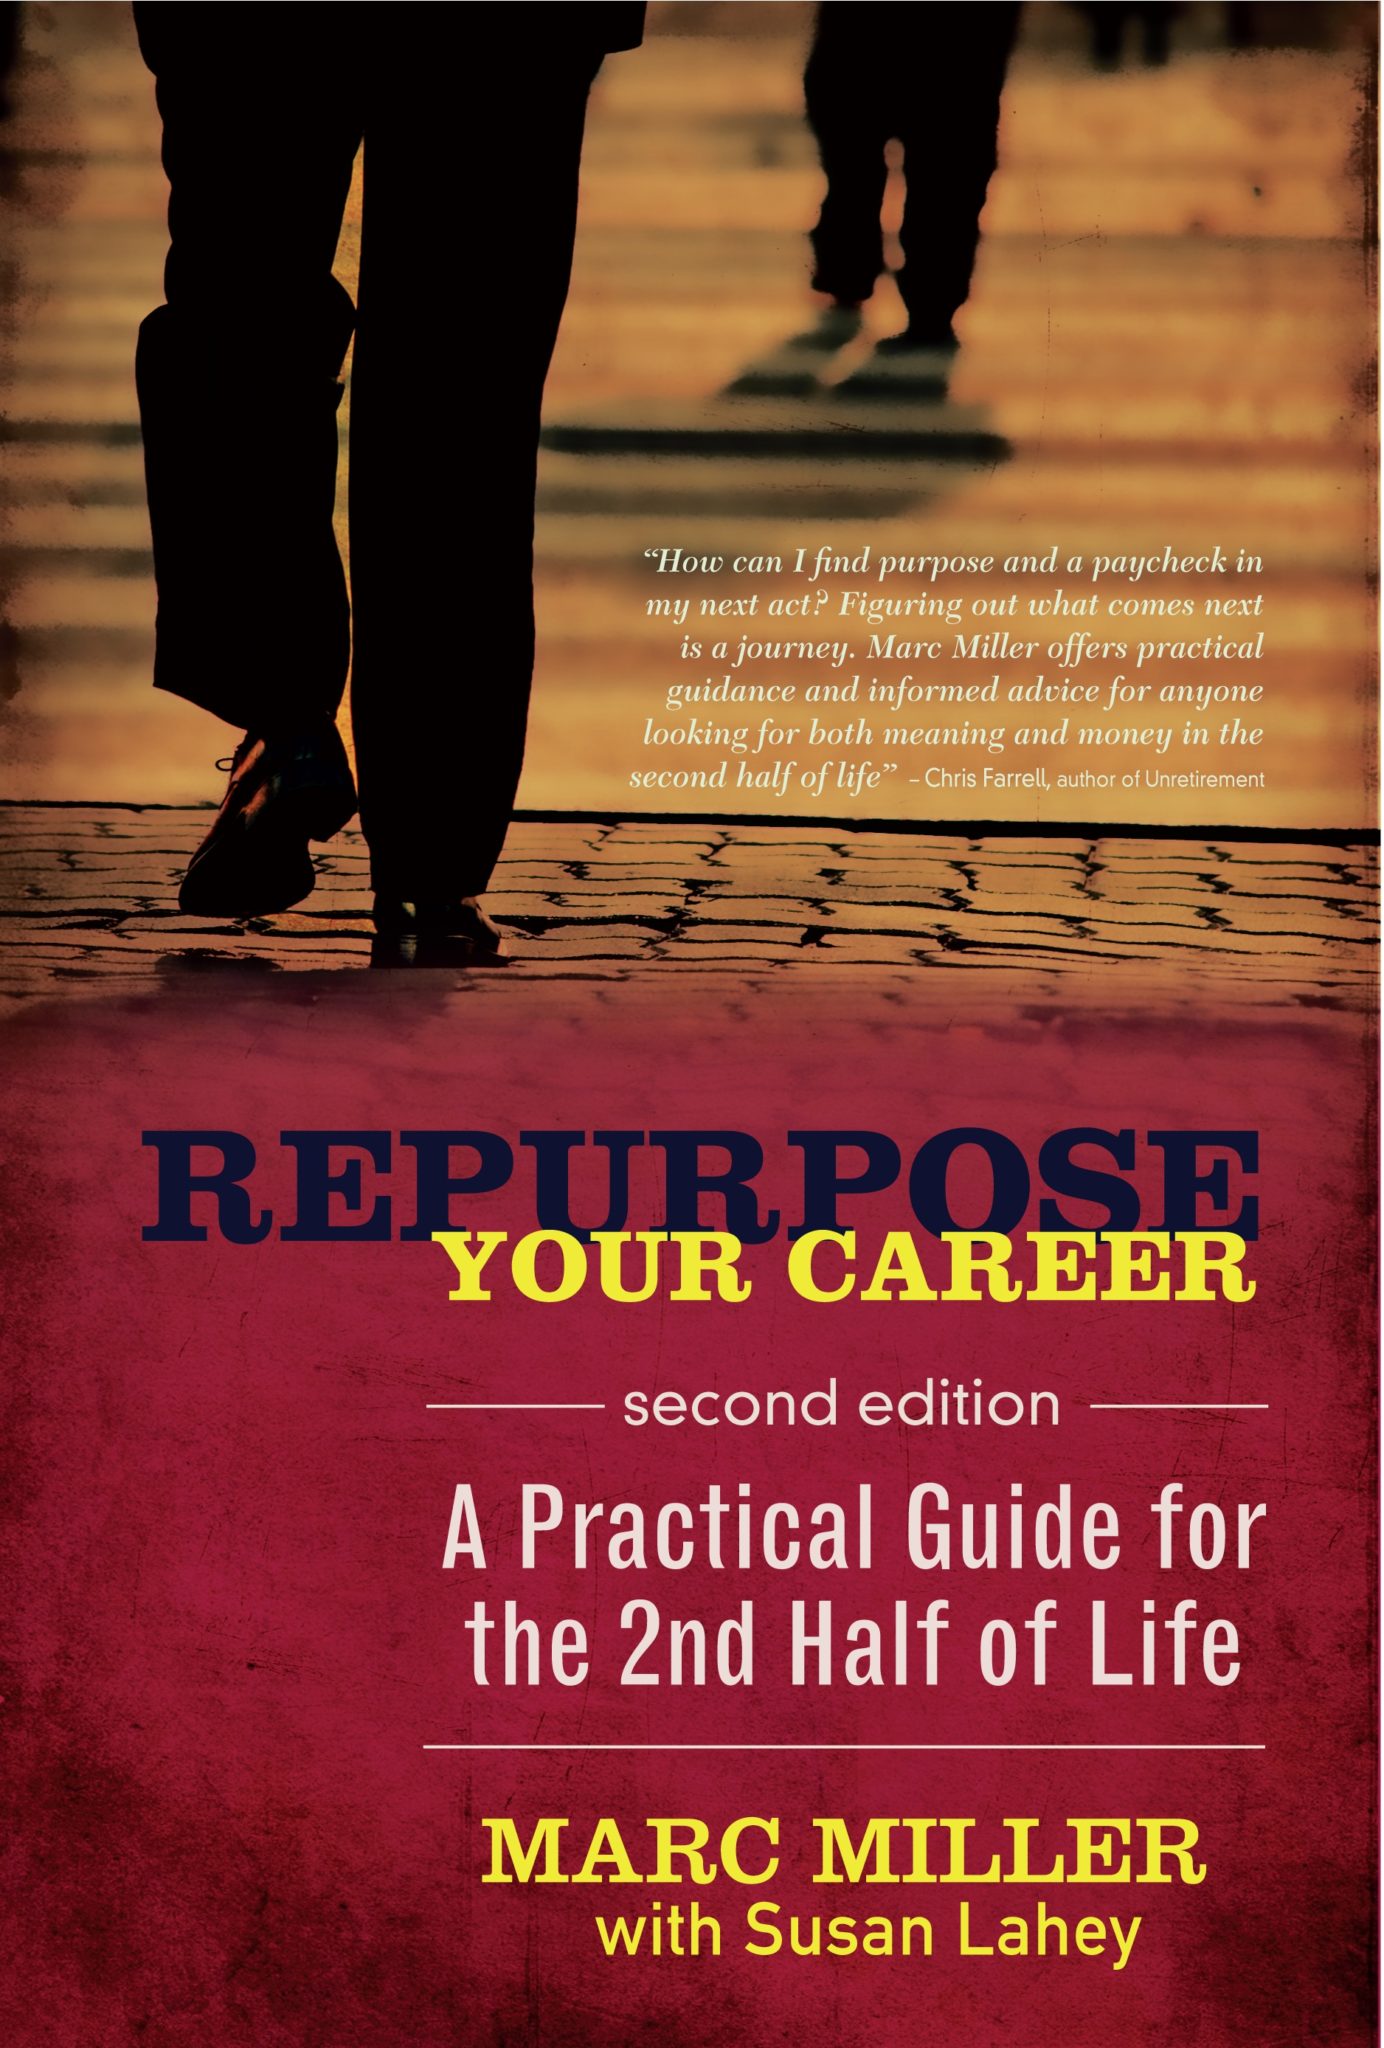 Repurpose Your Career  A Practical Guide for the 2nd Half of Life